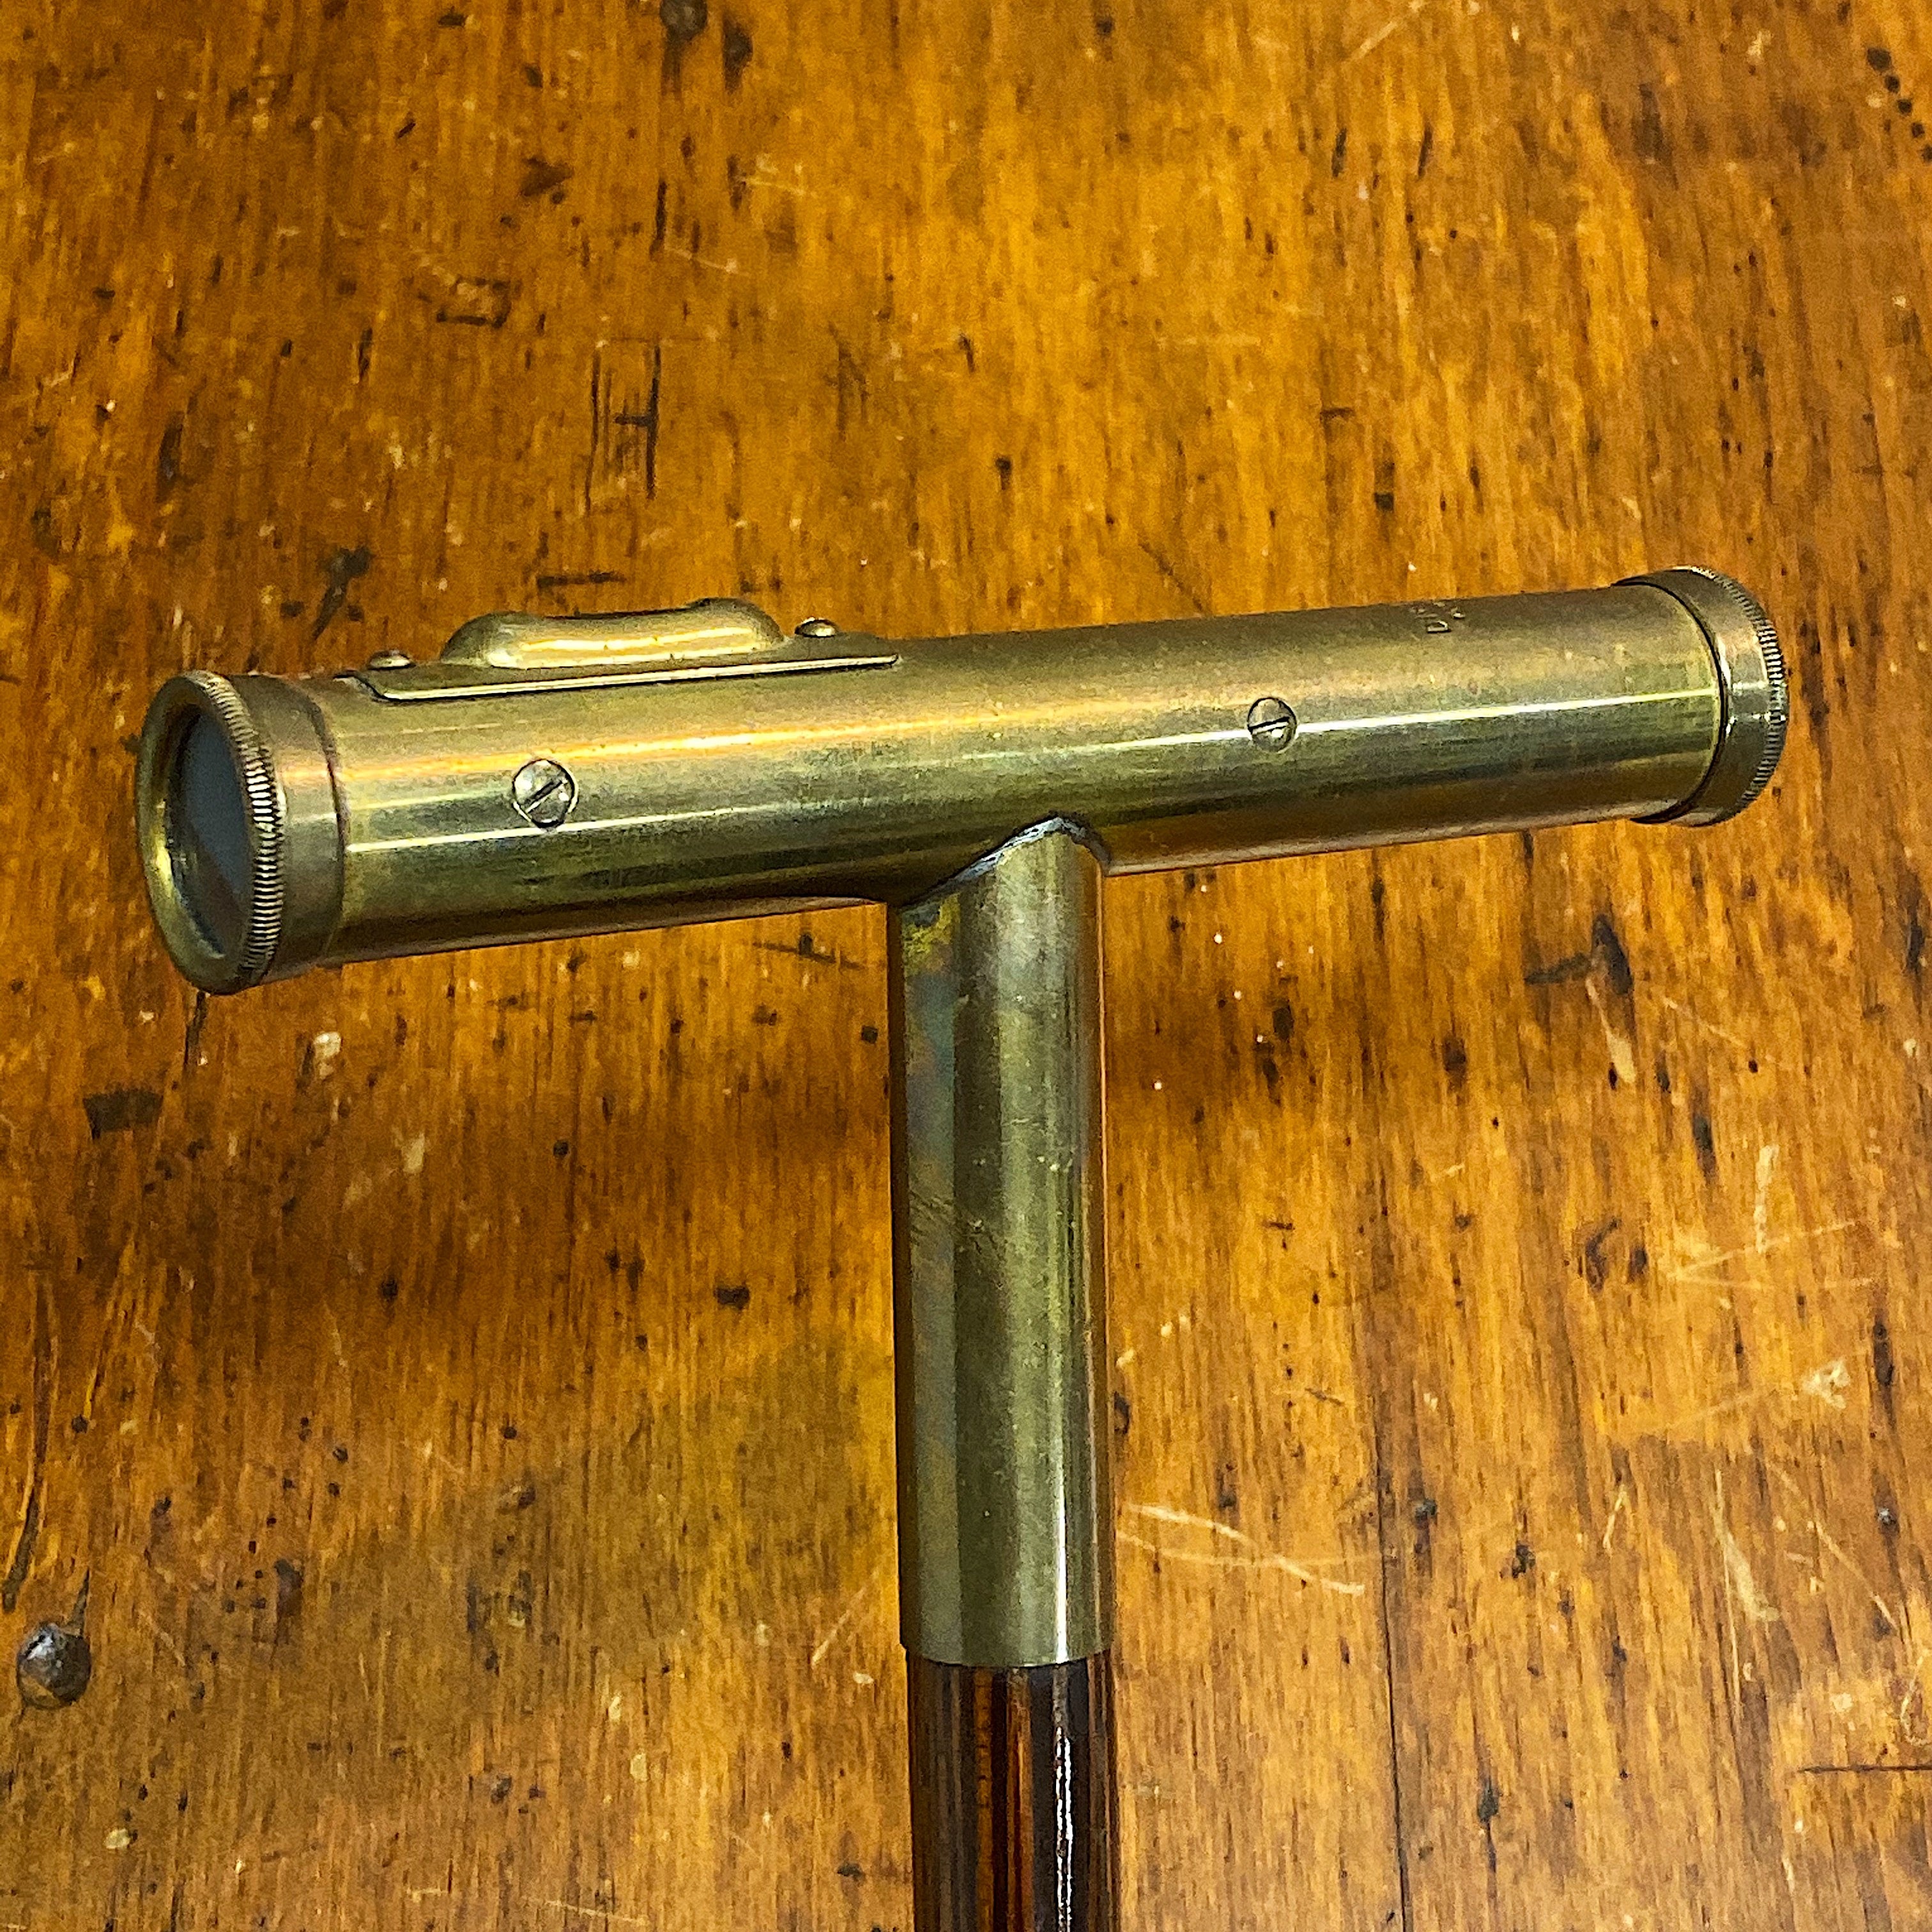 Antique Dietzgen Survey Gadget Cane - Early 1900s - Level System Cane - Rare Brass Walking Stick - Architectural Collectible